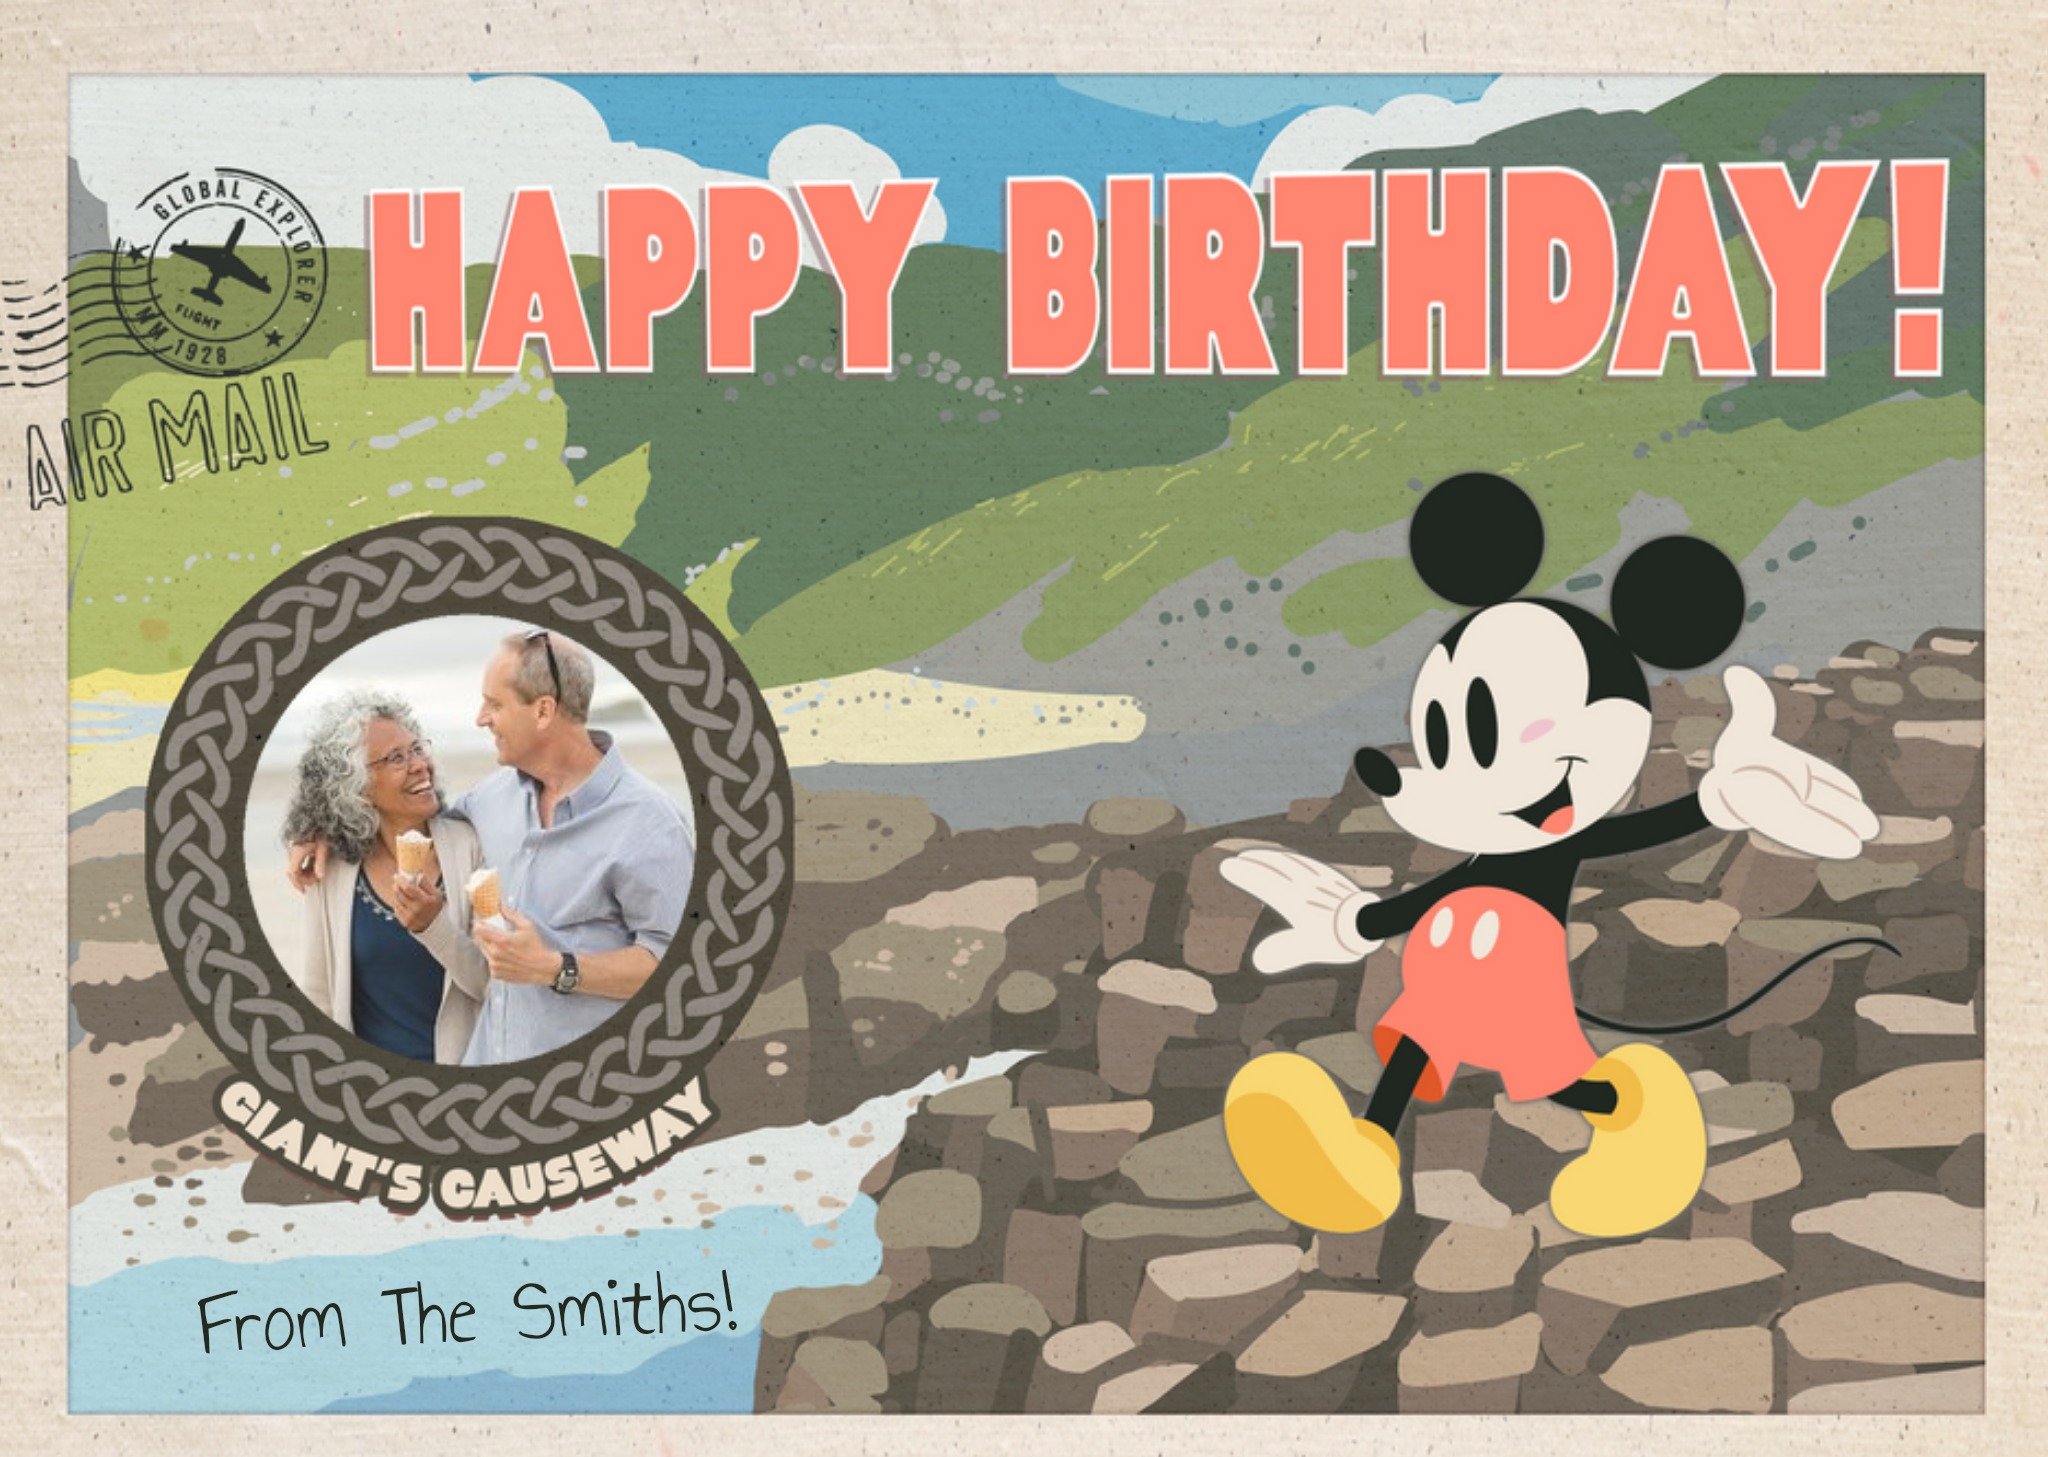 Mickey Mouse Giant's Causeway Northern Ireland Photo Upload Birthday Card By Disney Ecard